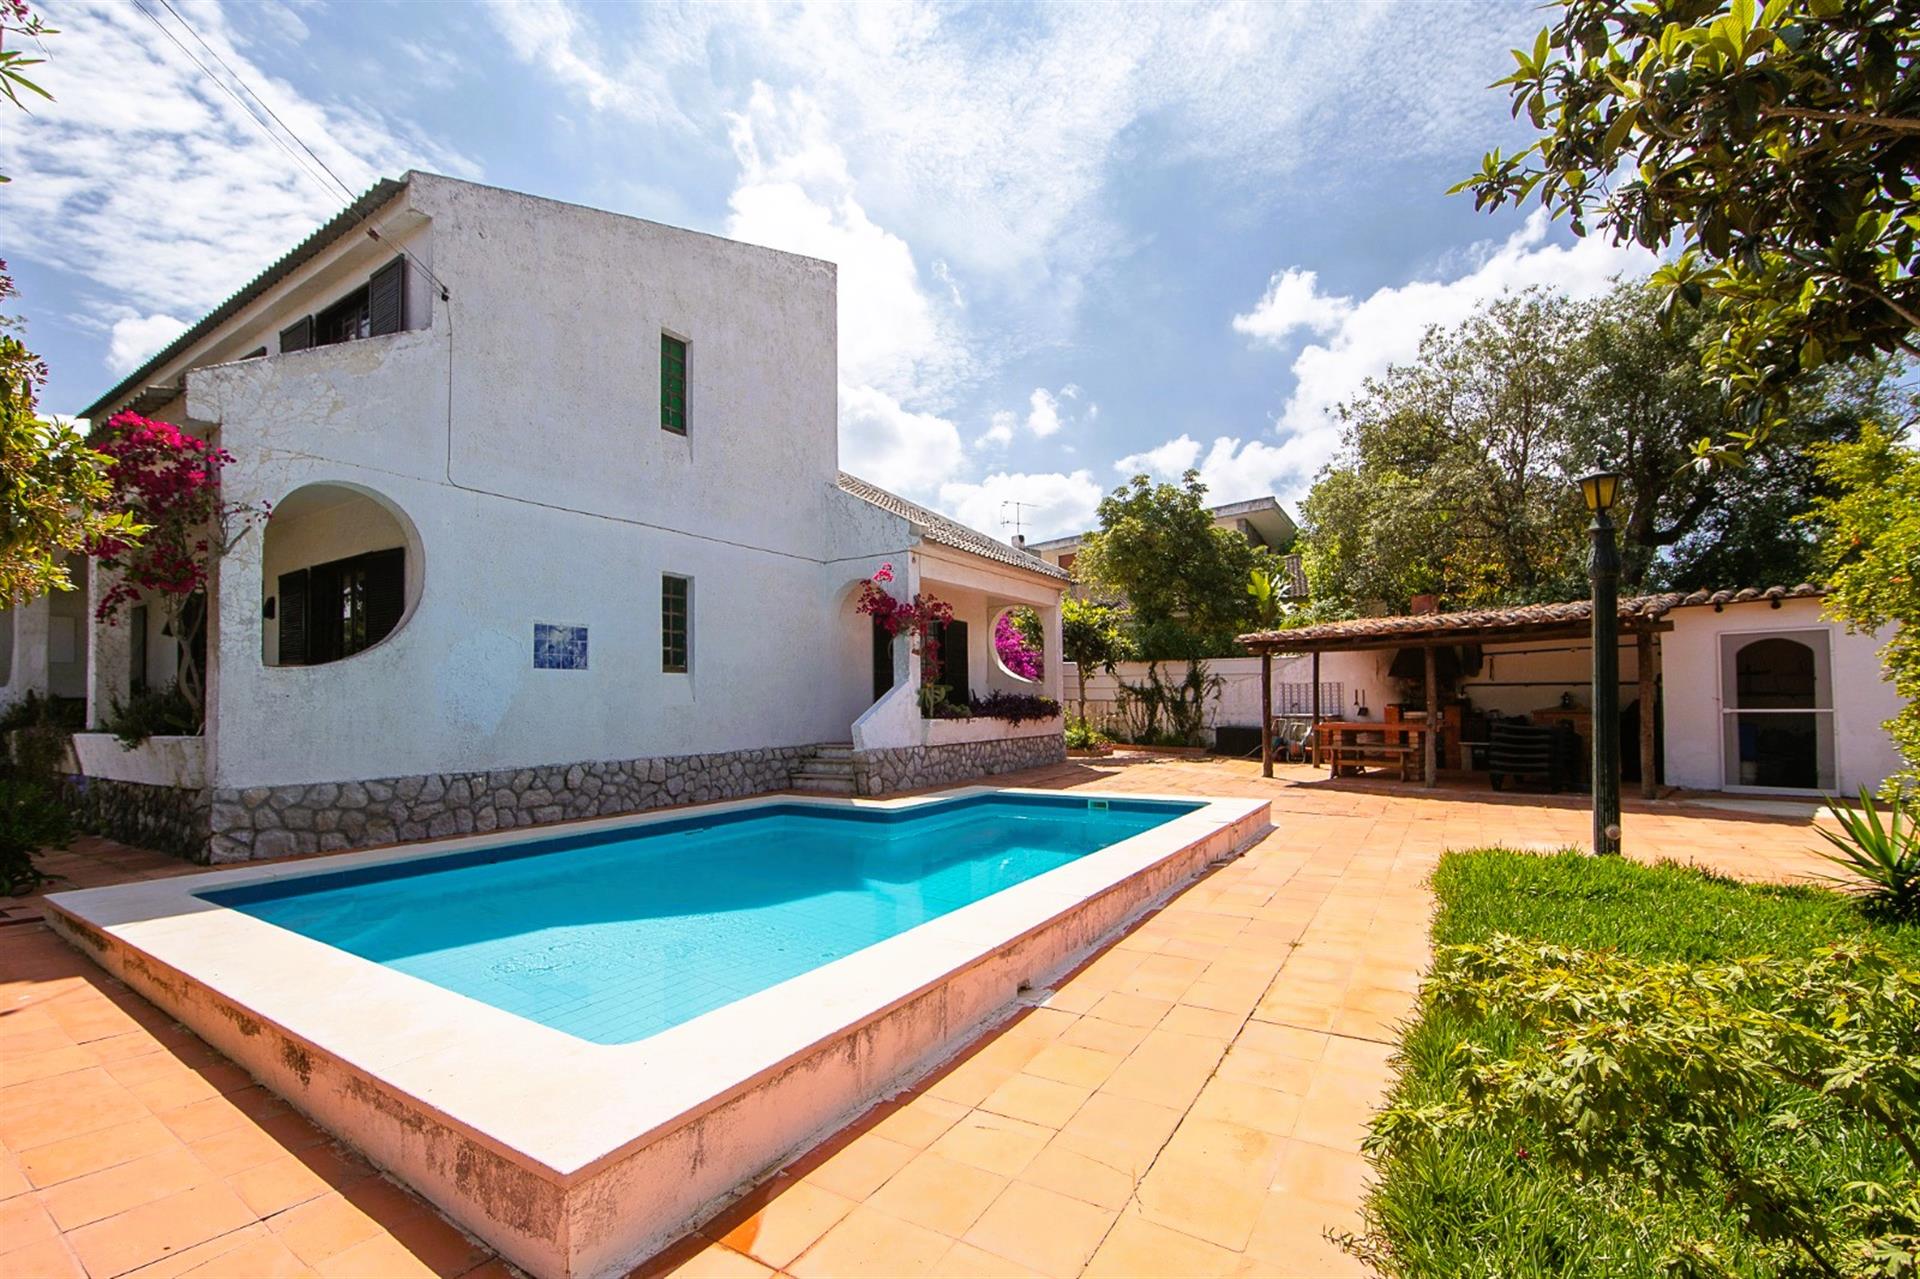 Villa with saltwater pool and garden, large areas